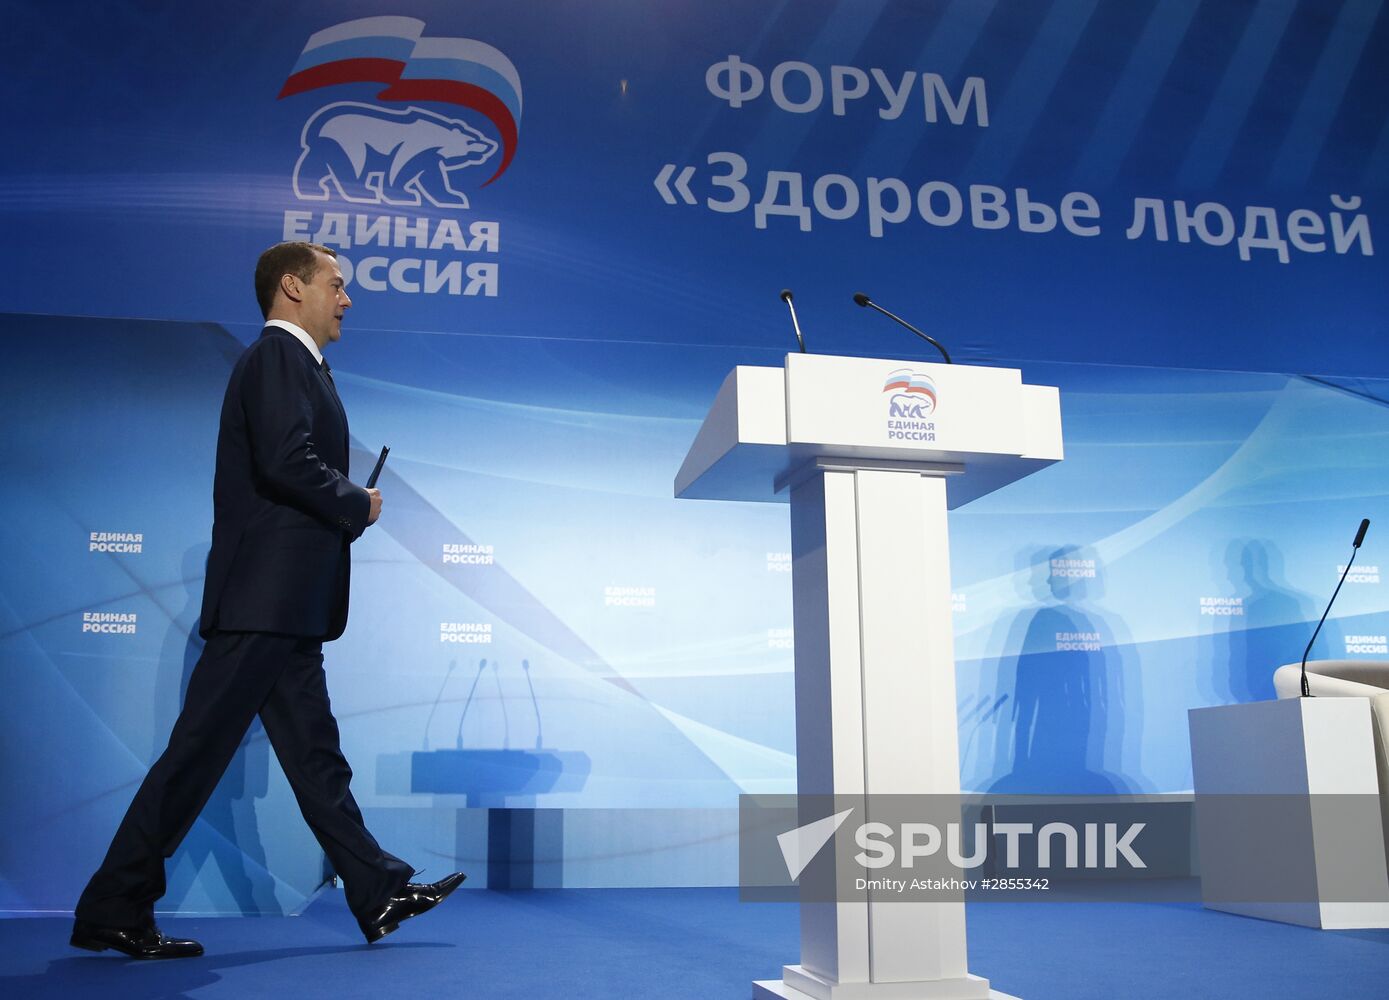 Russian Prime Minister Dmitry Medvedev's working trip to Crimea